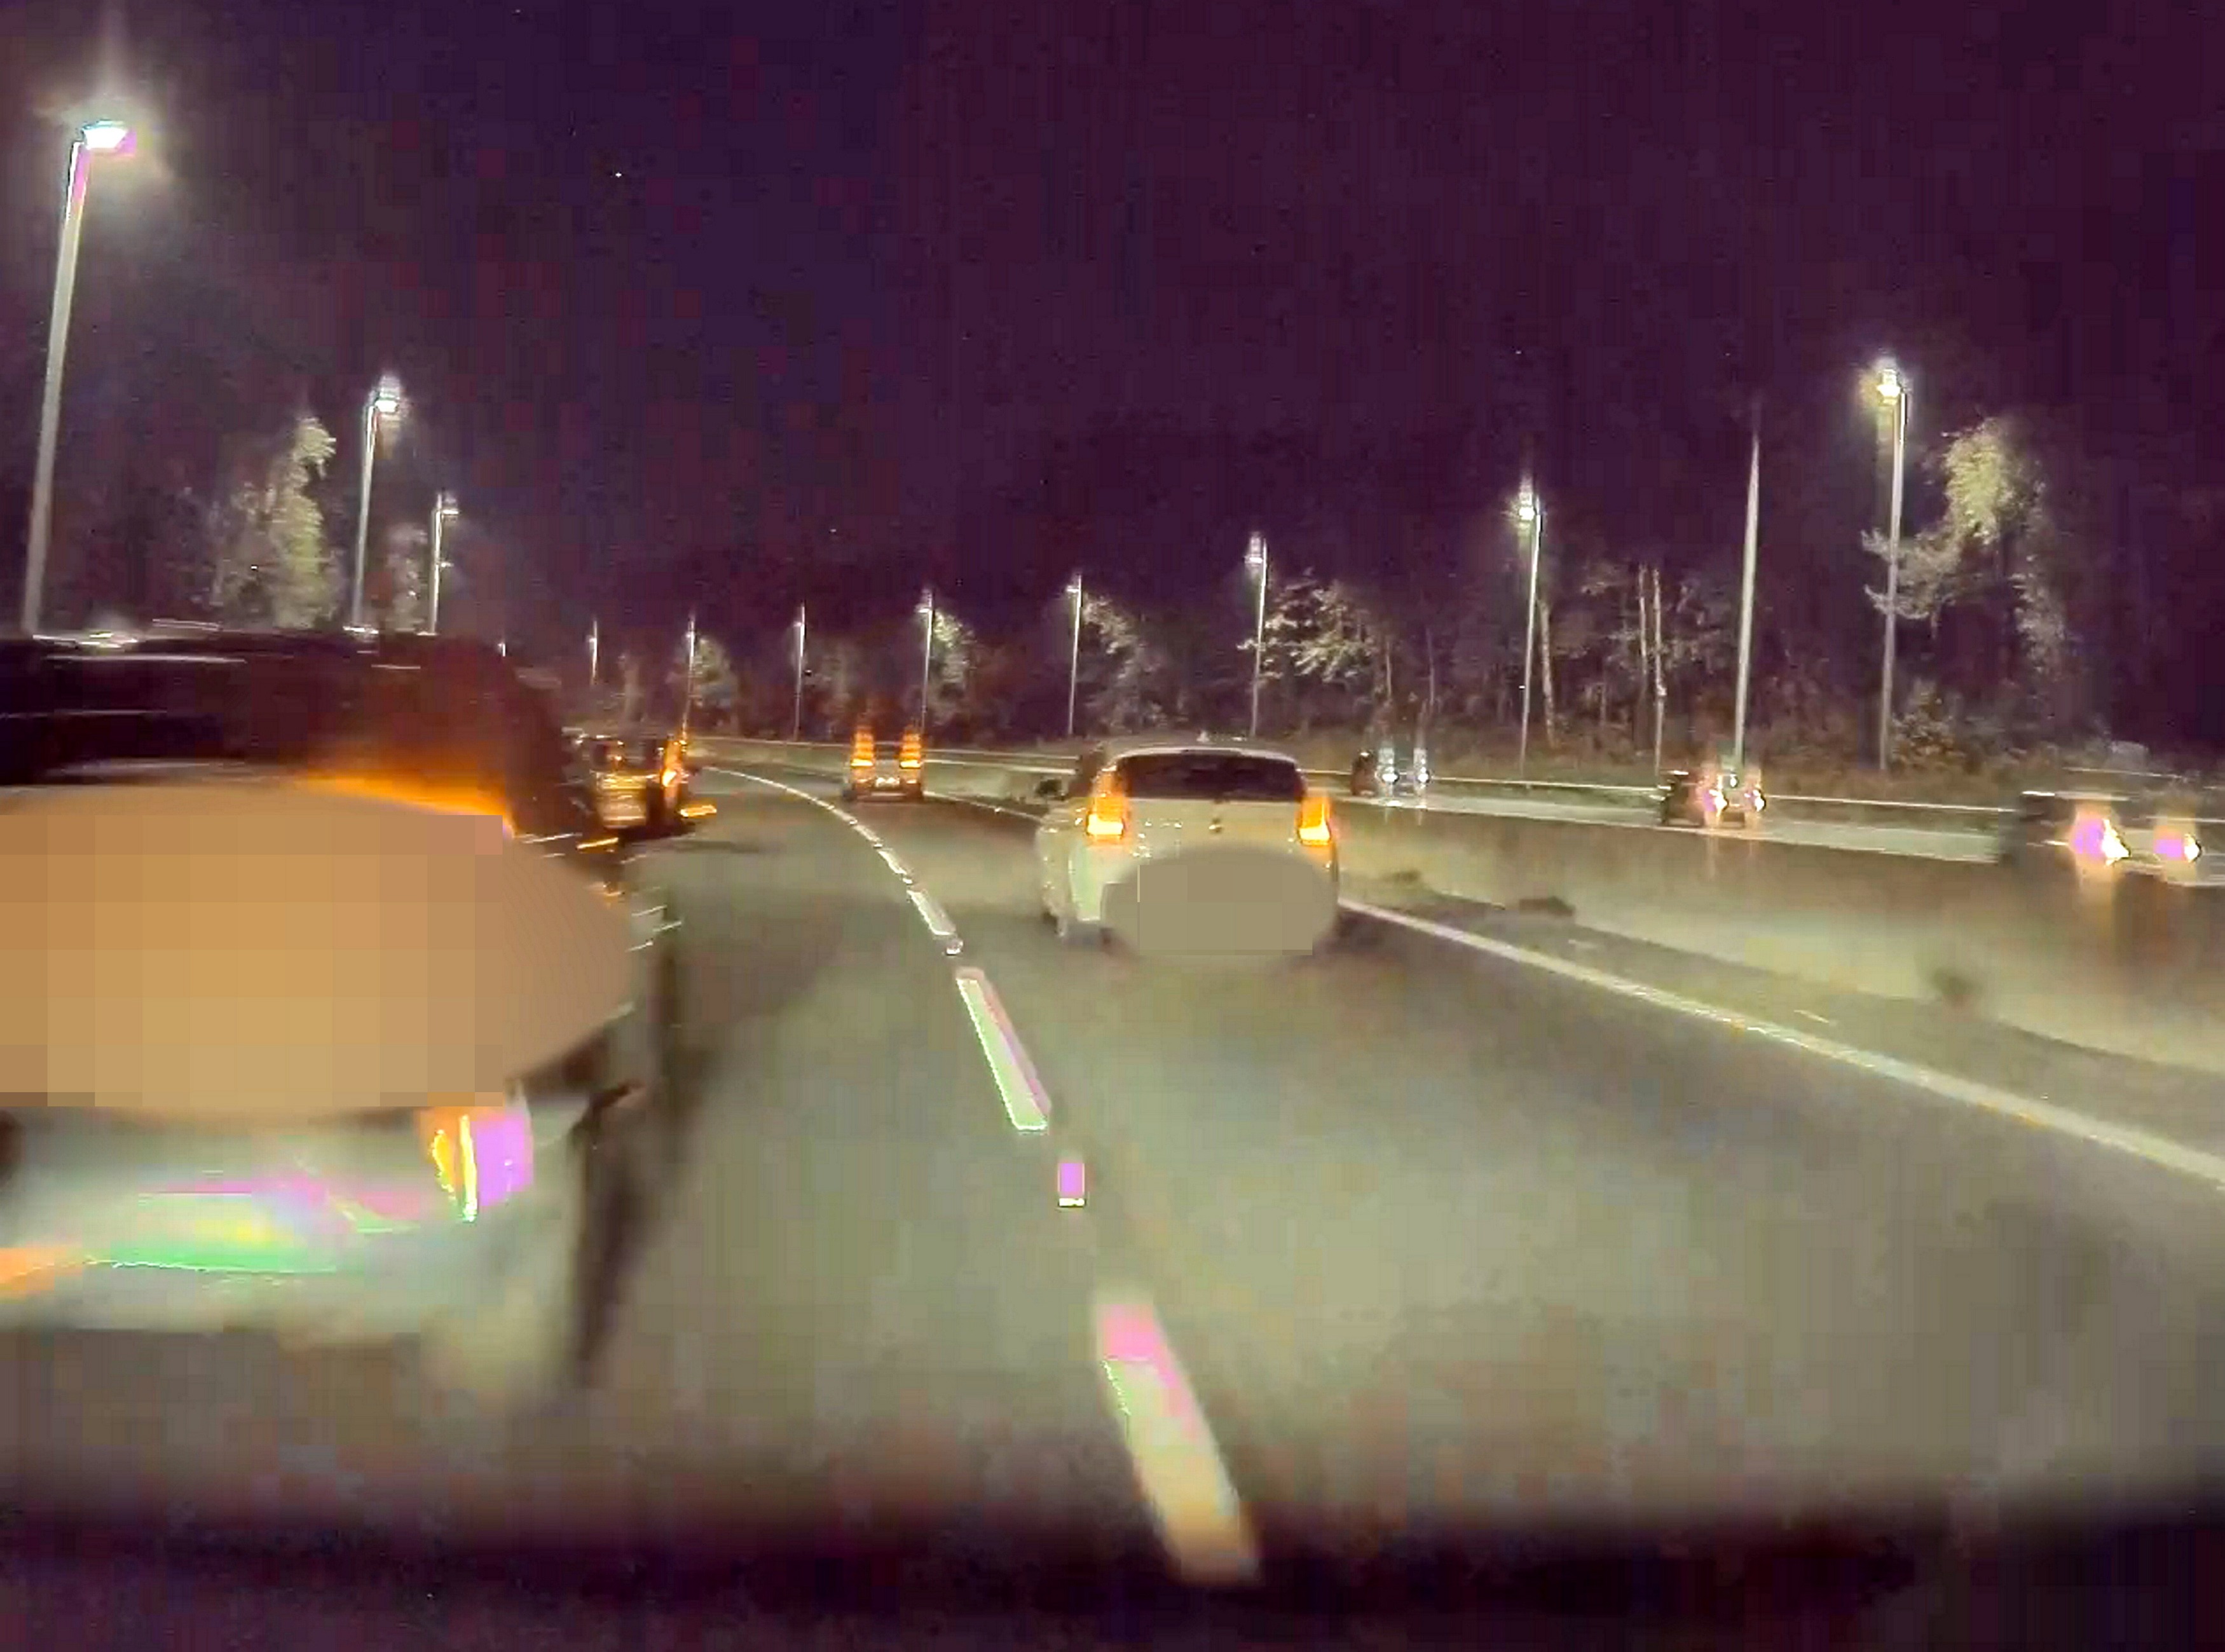 Herjean, driving erratically, overtakes a car in the middle lane, but crashes into the BMW in the right-hand lane